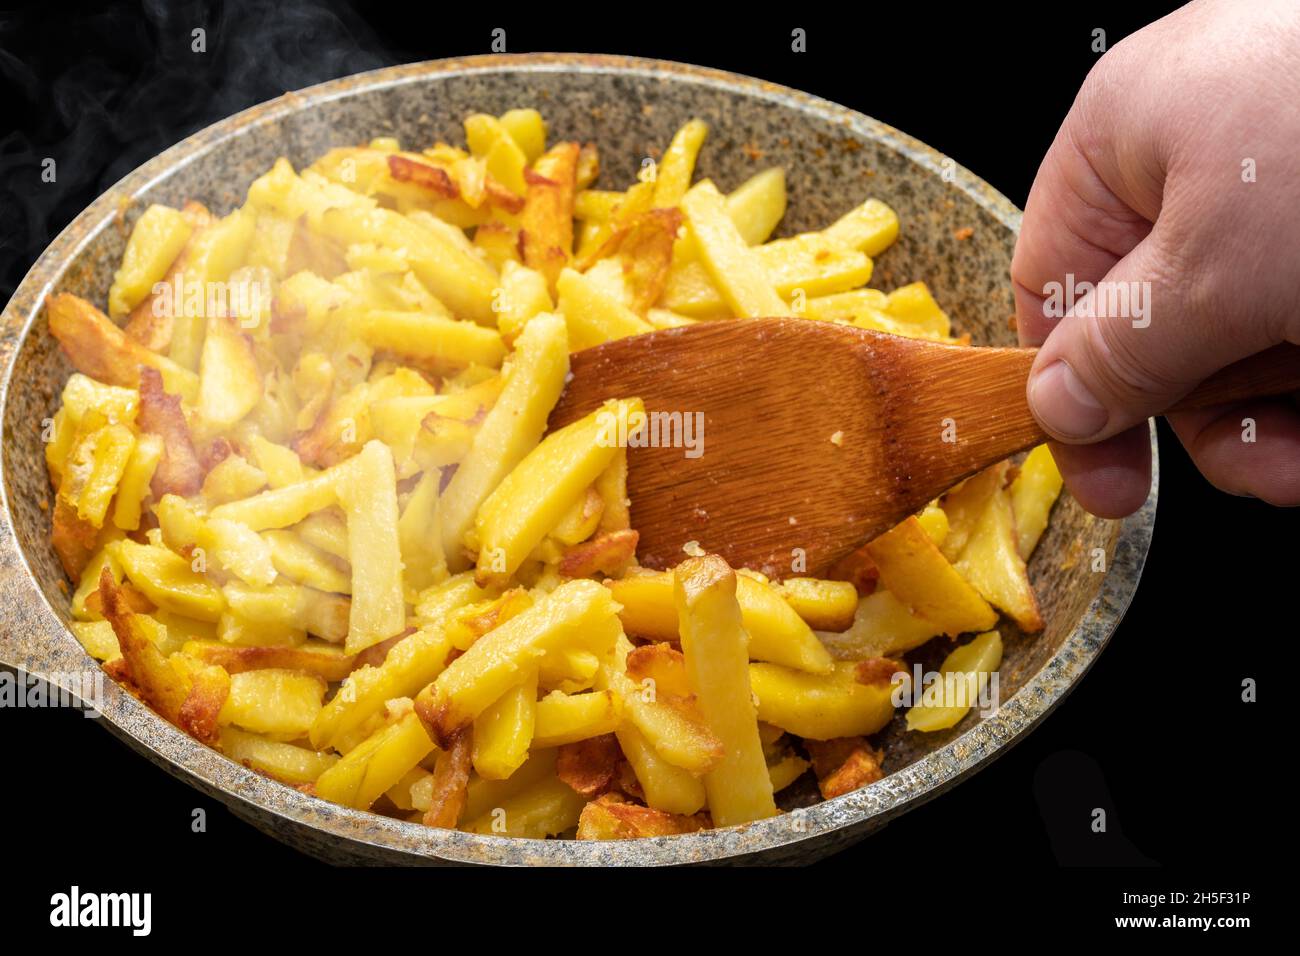 Chef's hand stirring with a wooden spatula delicious crispy golden hot fried potato wedges on an old metal frying pan close-up. Cooking homemade fried Stock Photo